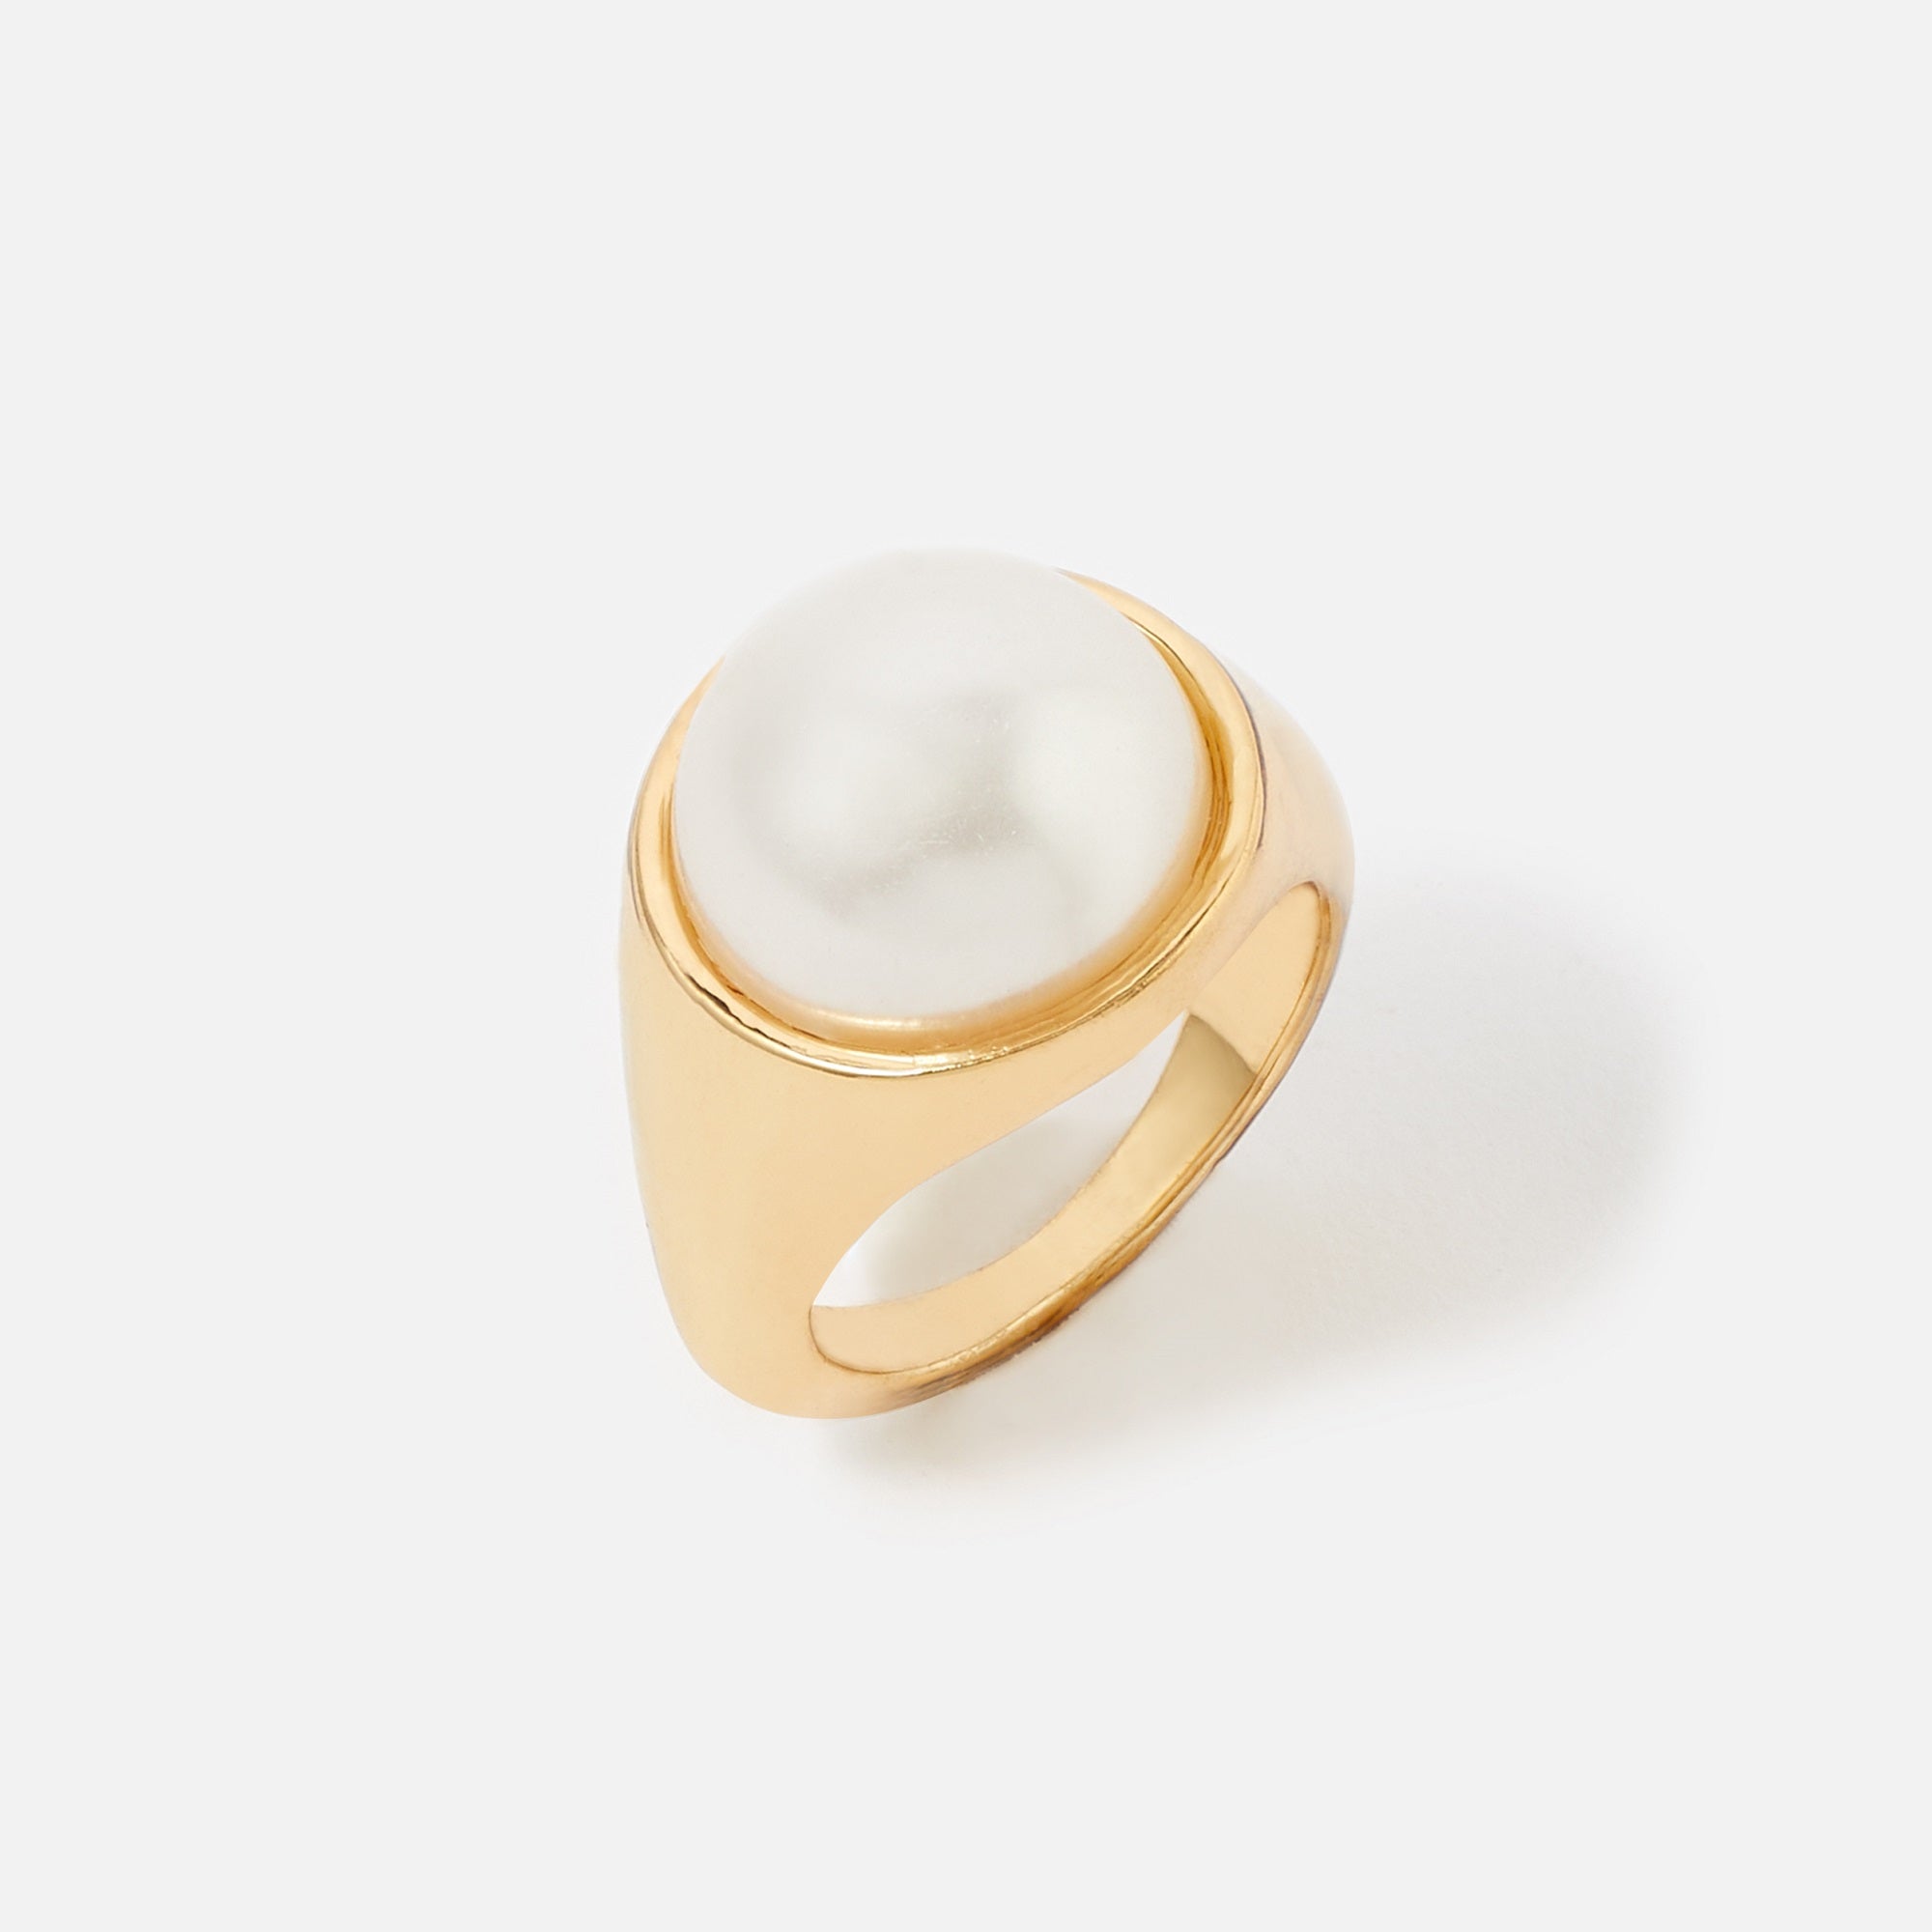 Accessorize London Women's Reconnected Pearl Chubby Ring Medium